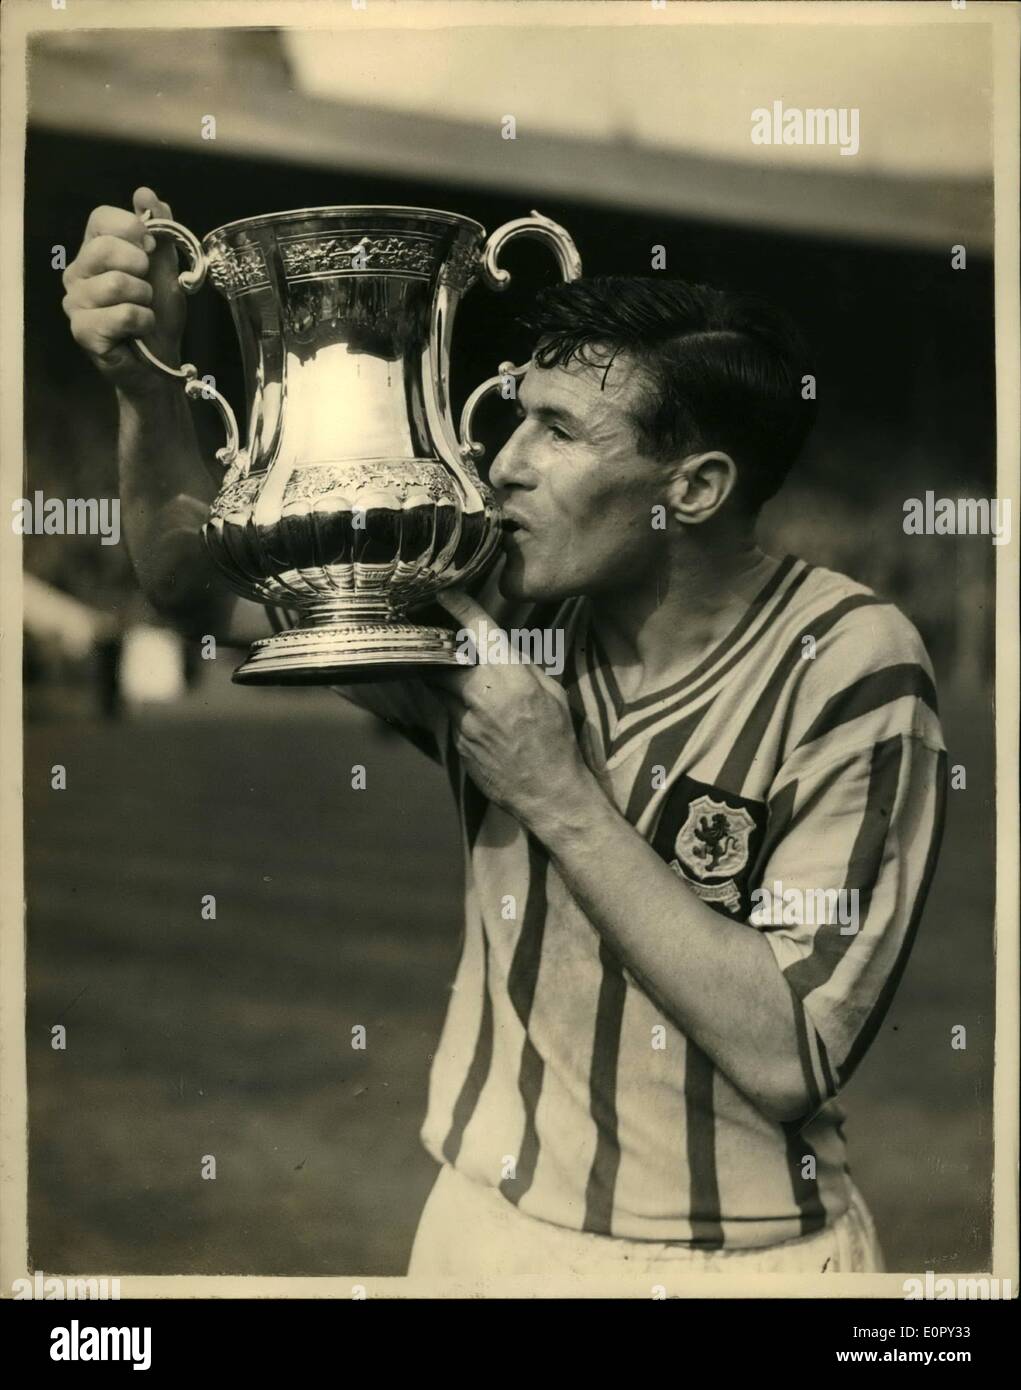 May 04, 1957 - 4-5-57 Aston Villa win the F.A. Cup at Wembley. A kiss for the cup Ã¢â‚¬â€œ Aston Villa won the 1957 F.A. Cup at Stock Photo